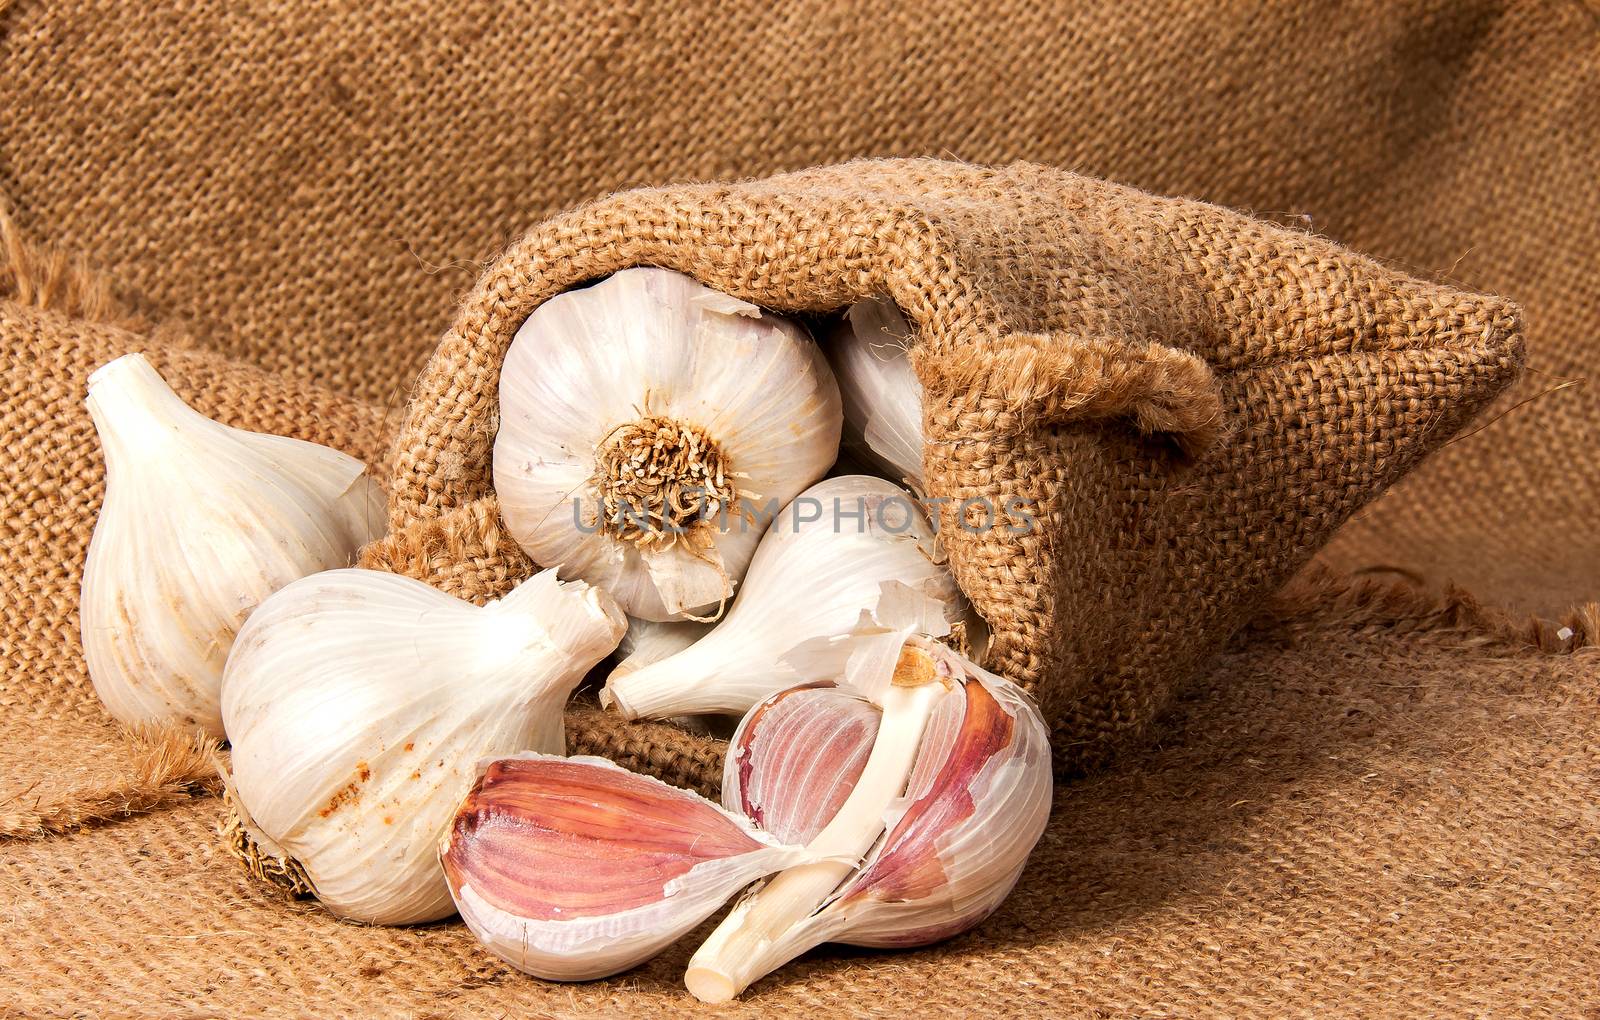 Whole garlic and cloves of garlic in a bag by Cipariss